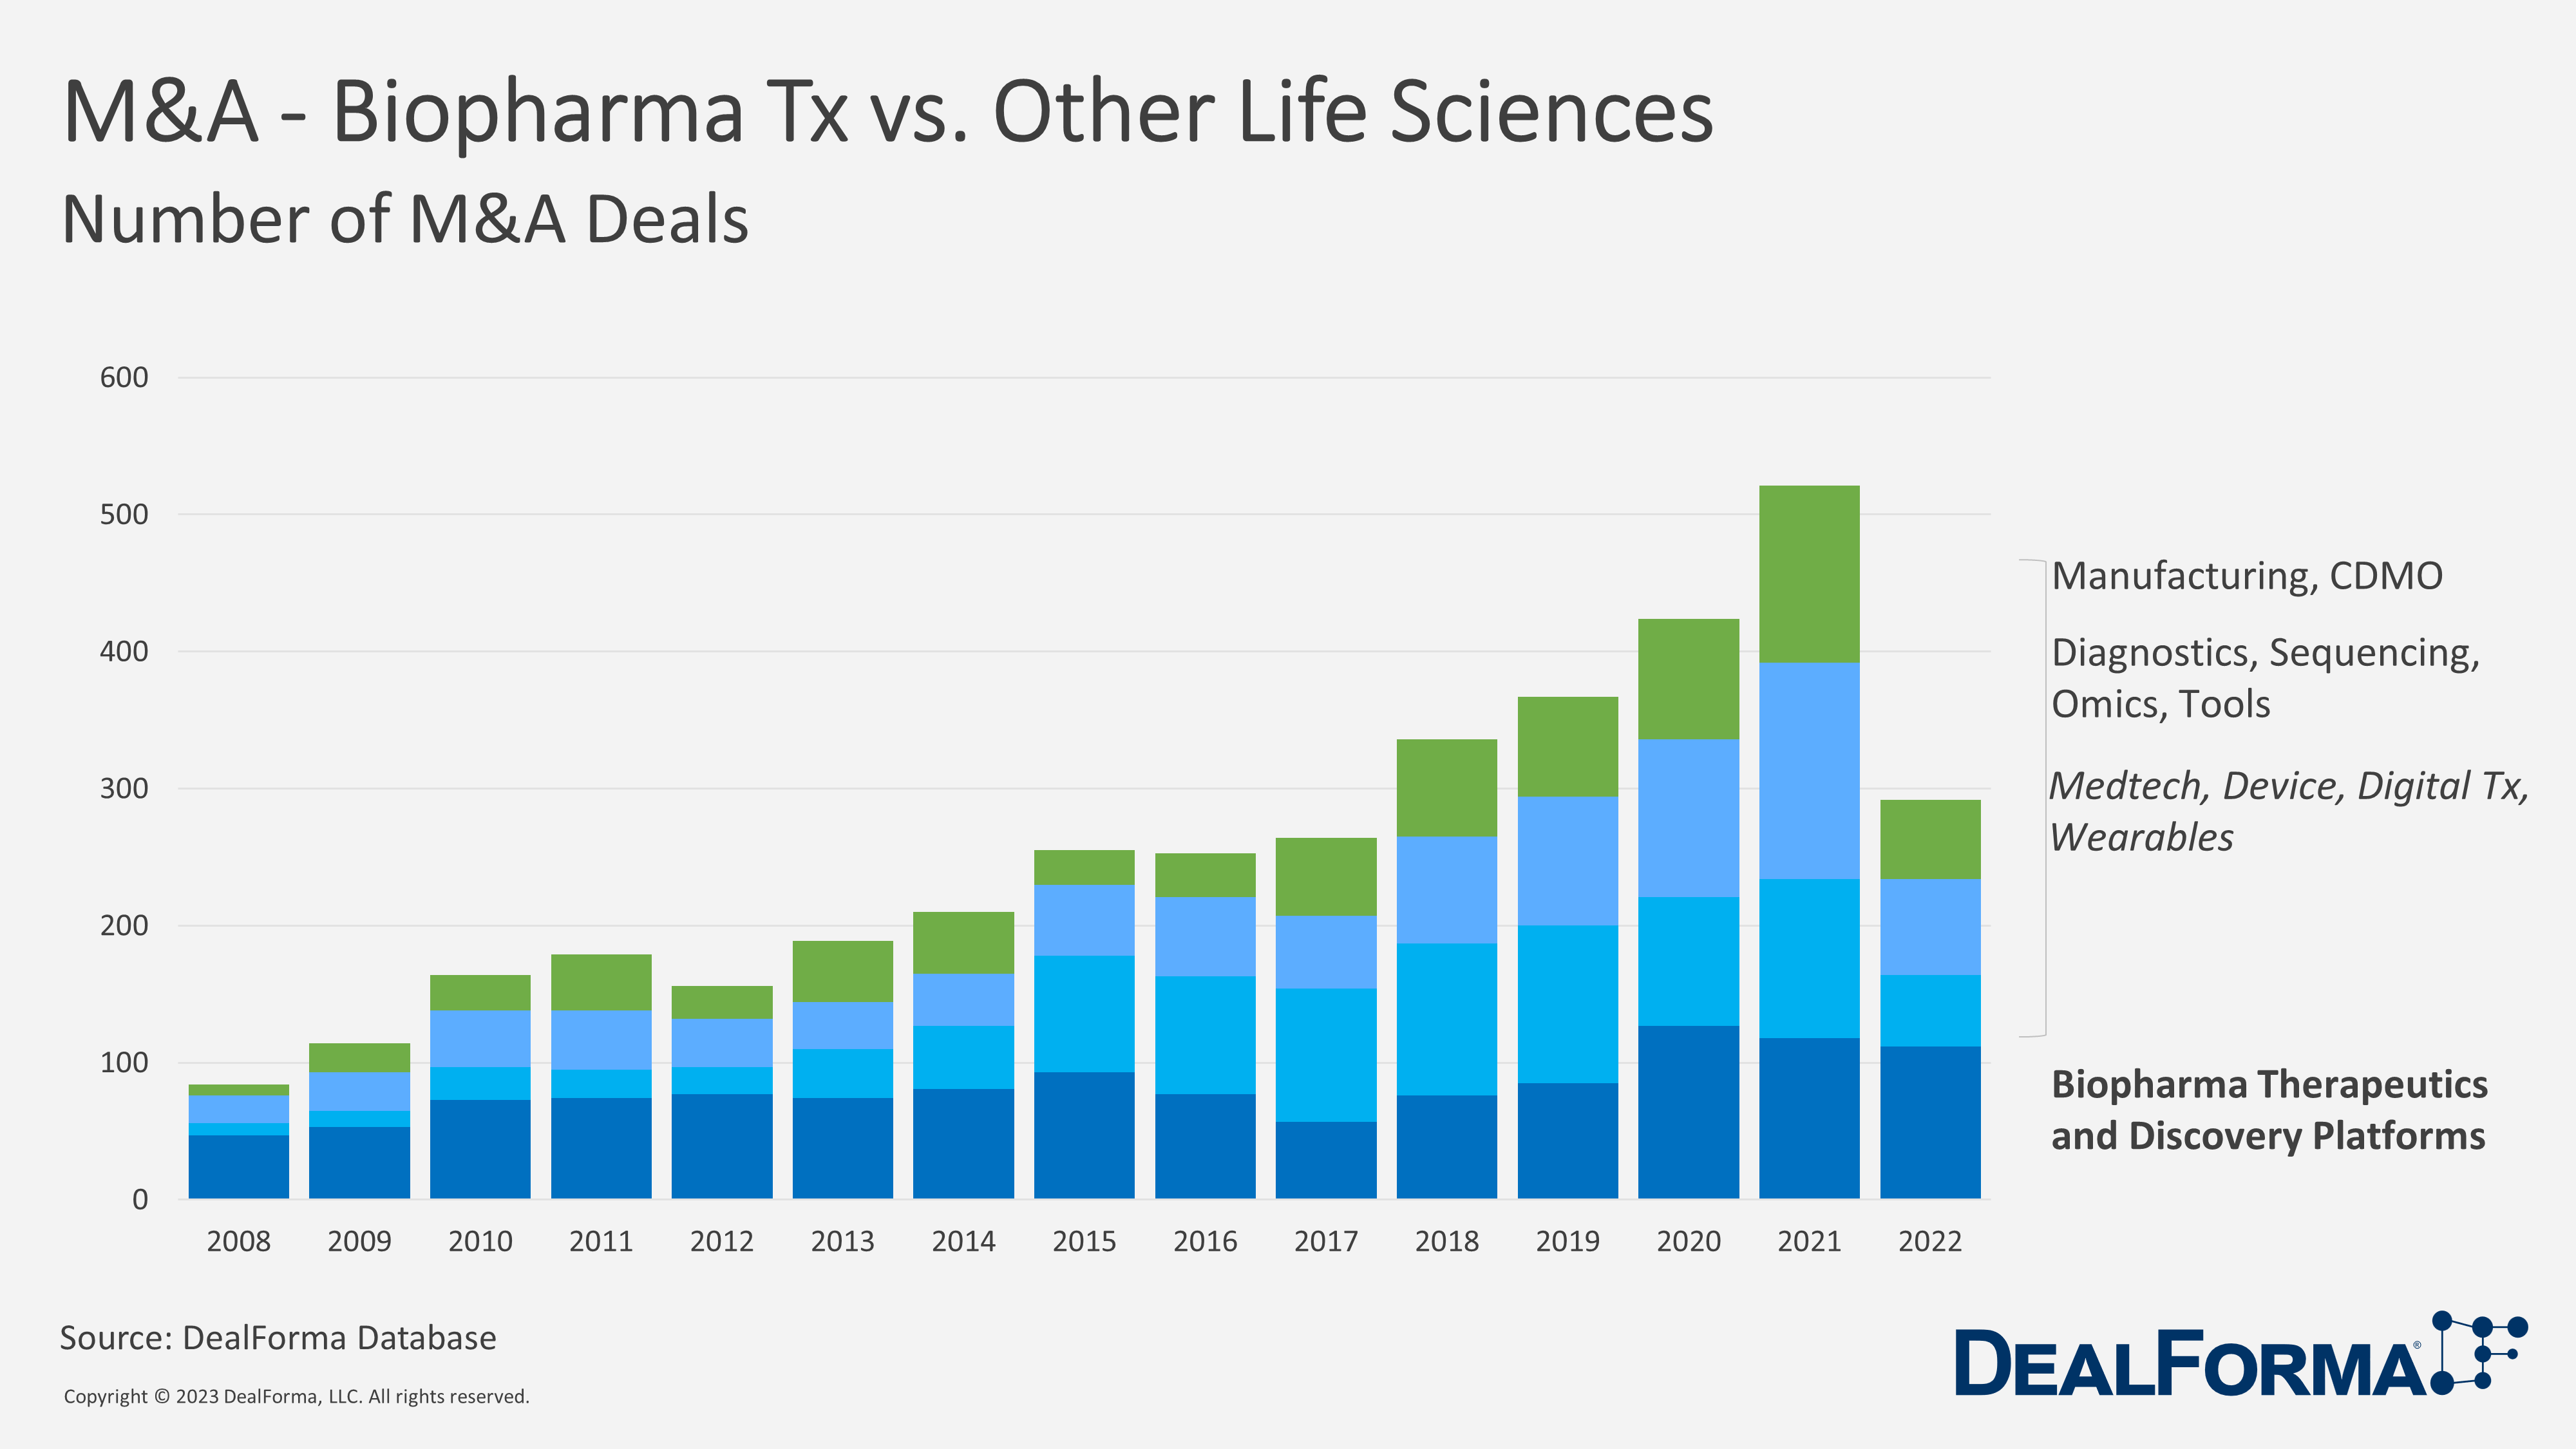 M&A - Biopharma Tx vs. Other Life Sciences Number of M&A Deals